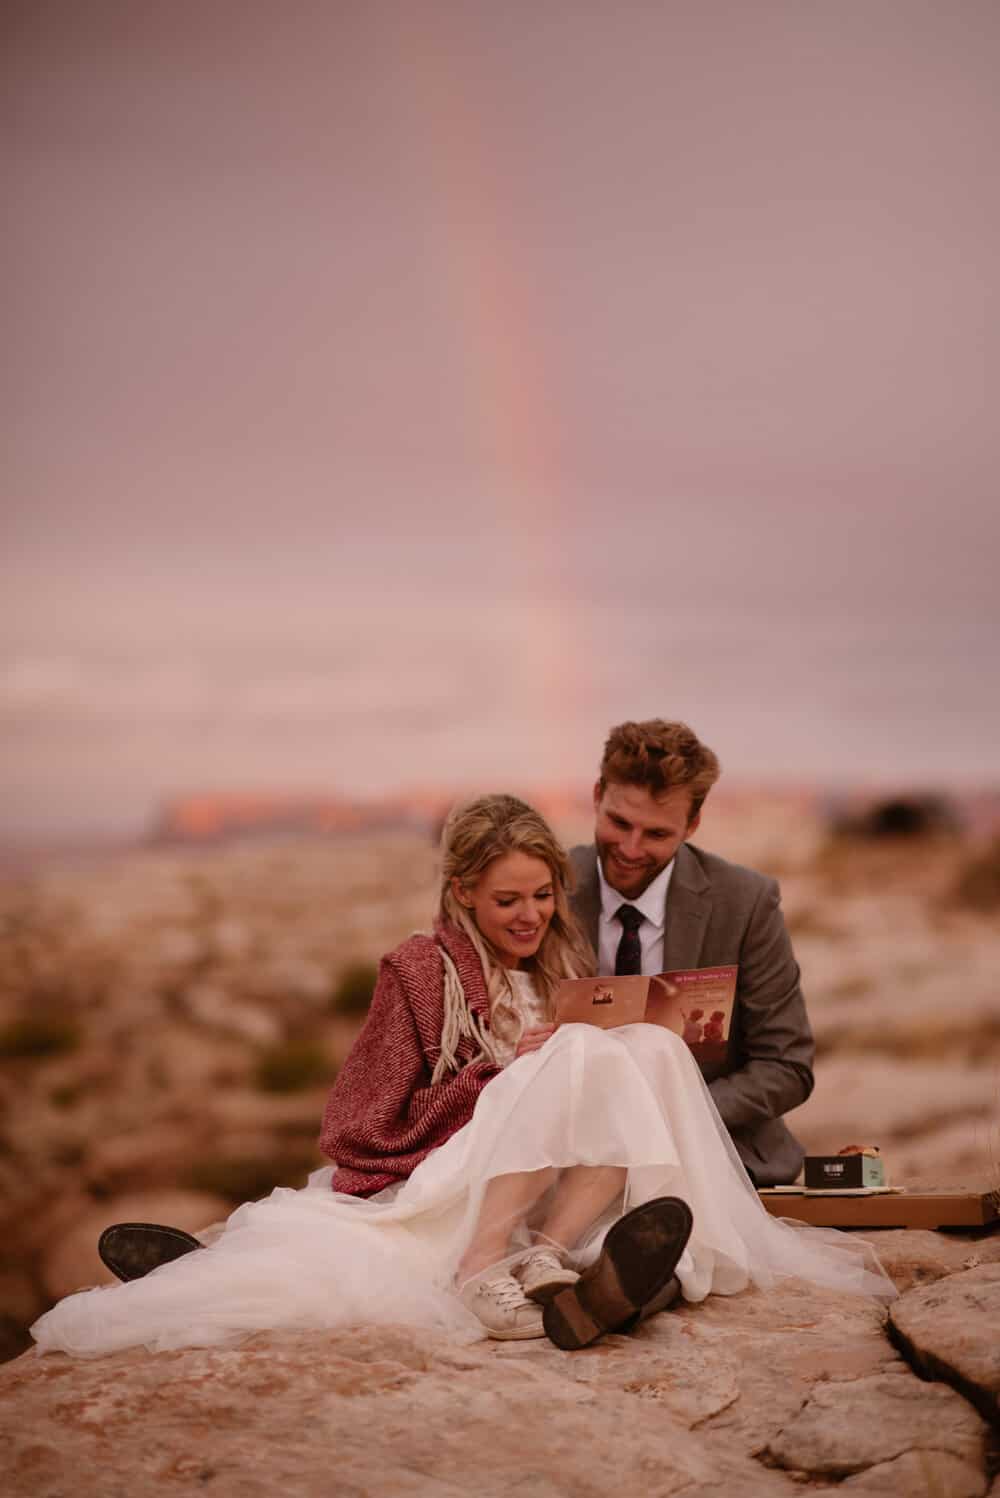 A bride and groom read letters together while a rainbow shines behind them.